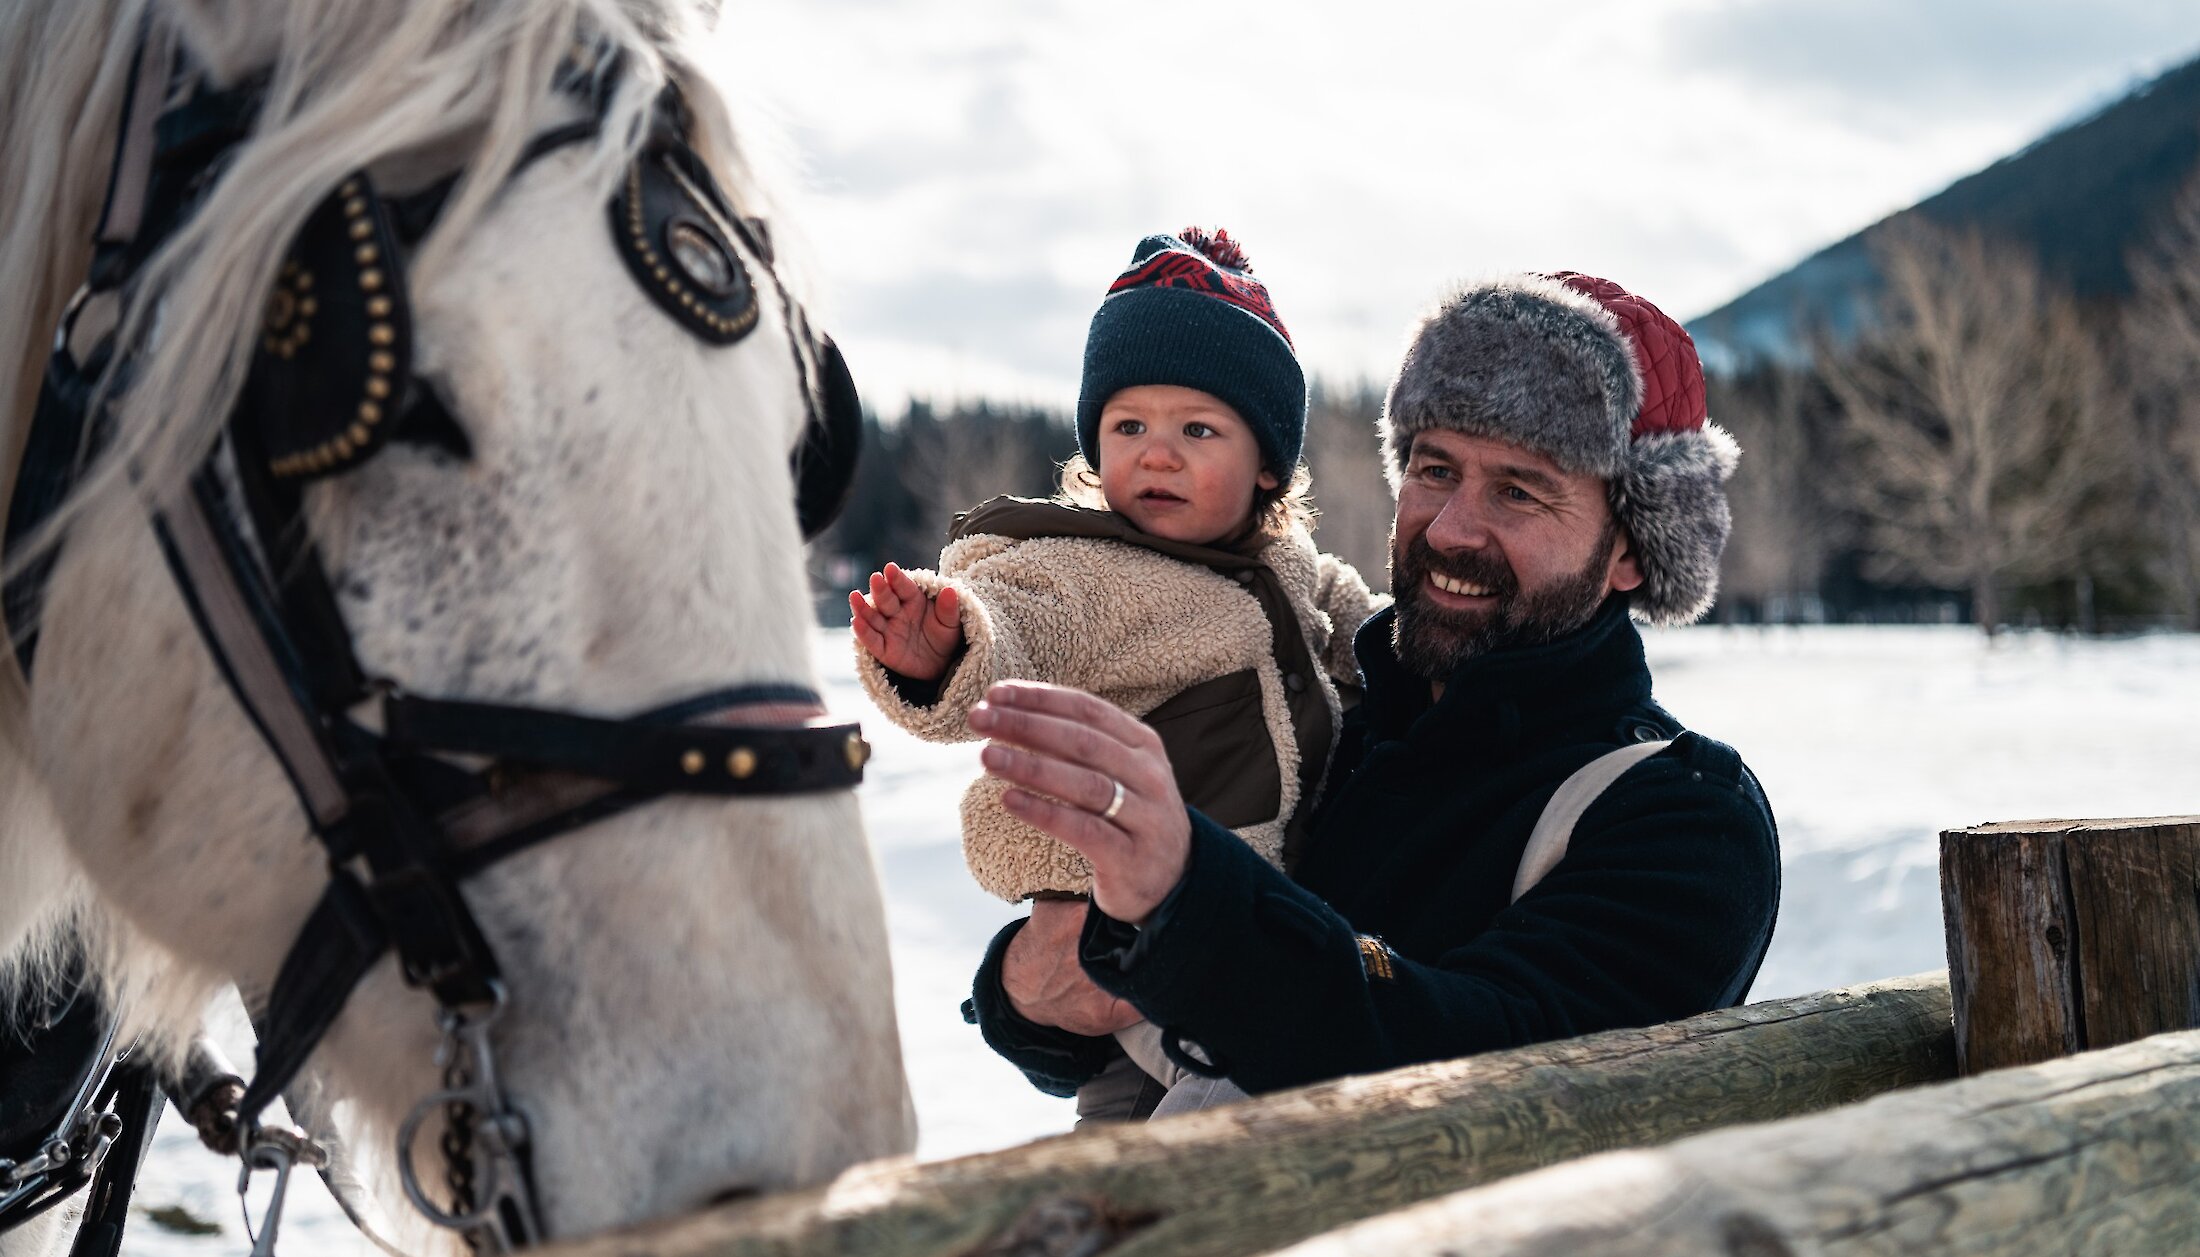 Father and child meet the horses for their private family sleigh ride